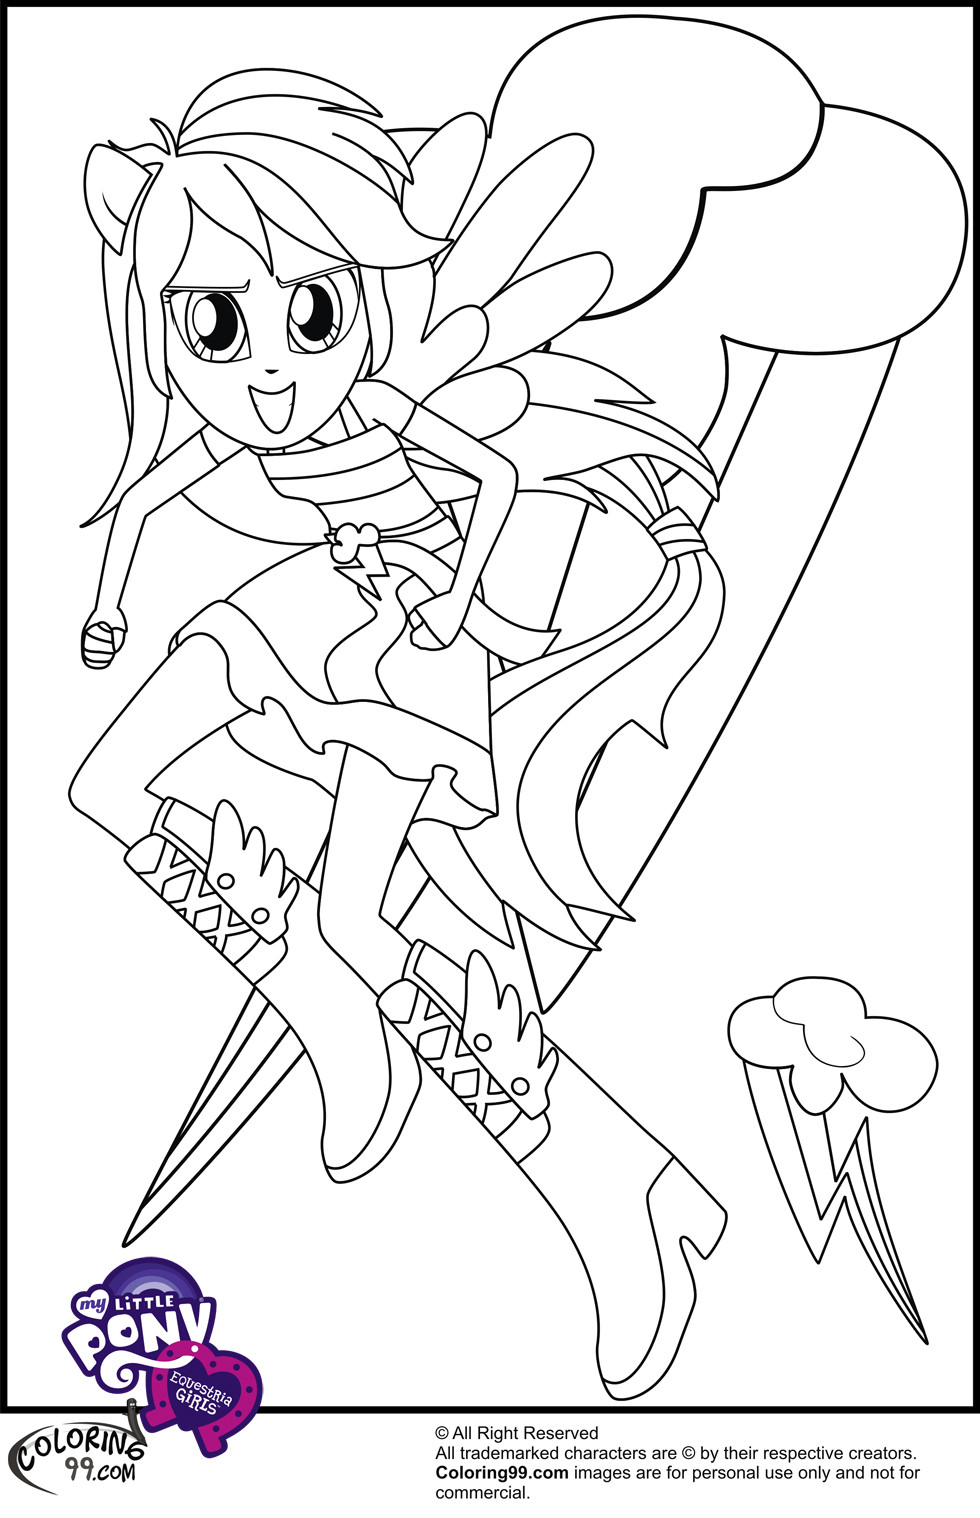 Coloring Sheets Of Girls
 My Little Pony Equestria Girls Coloring Pages